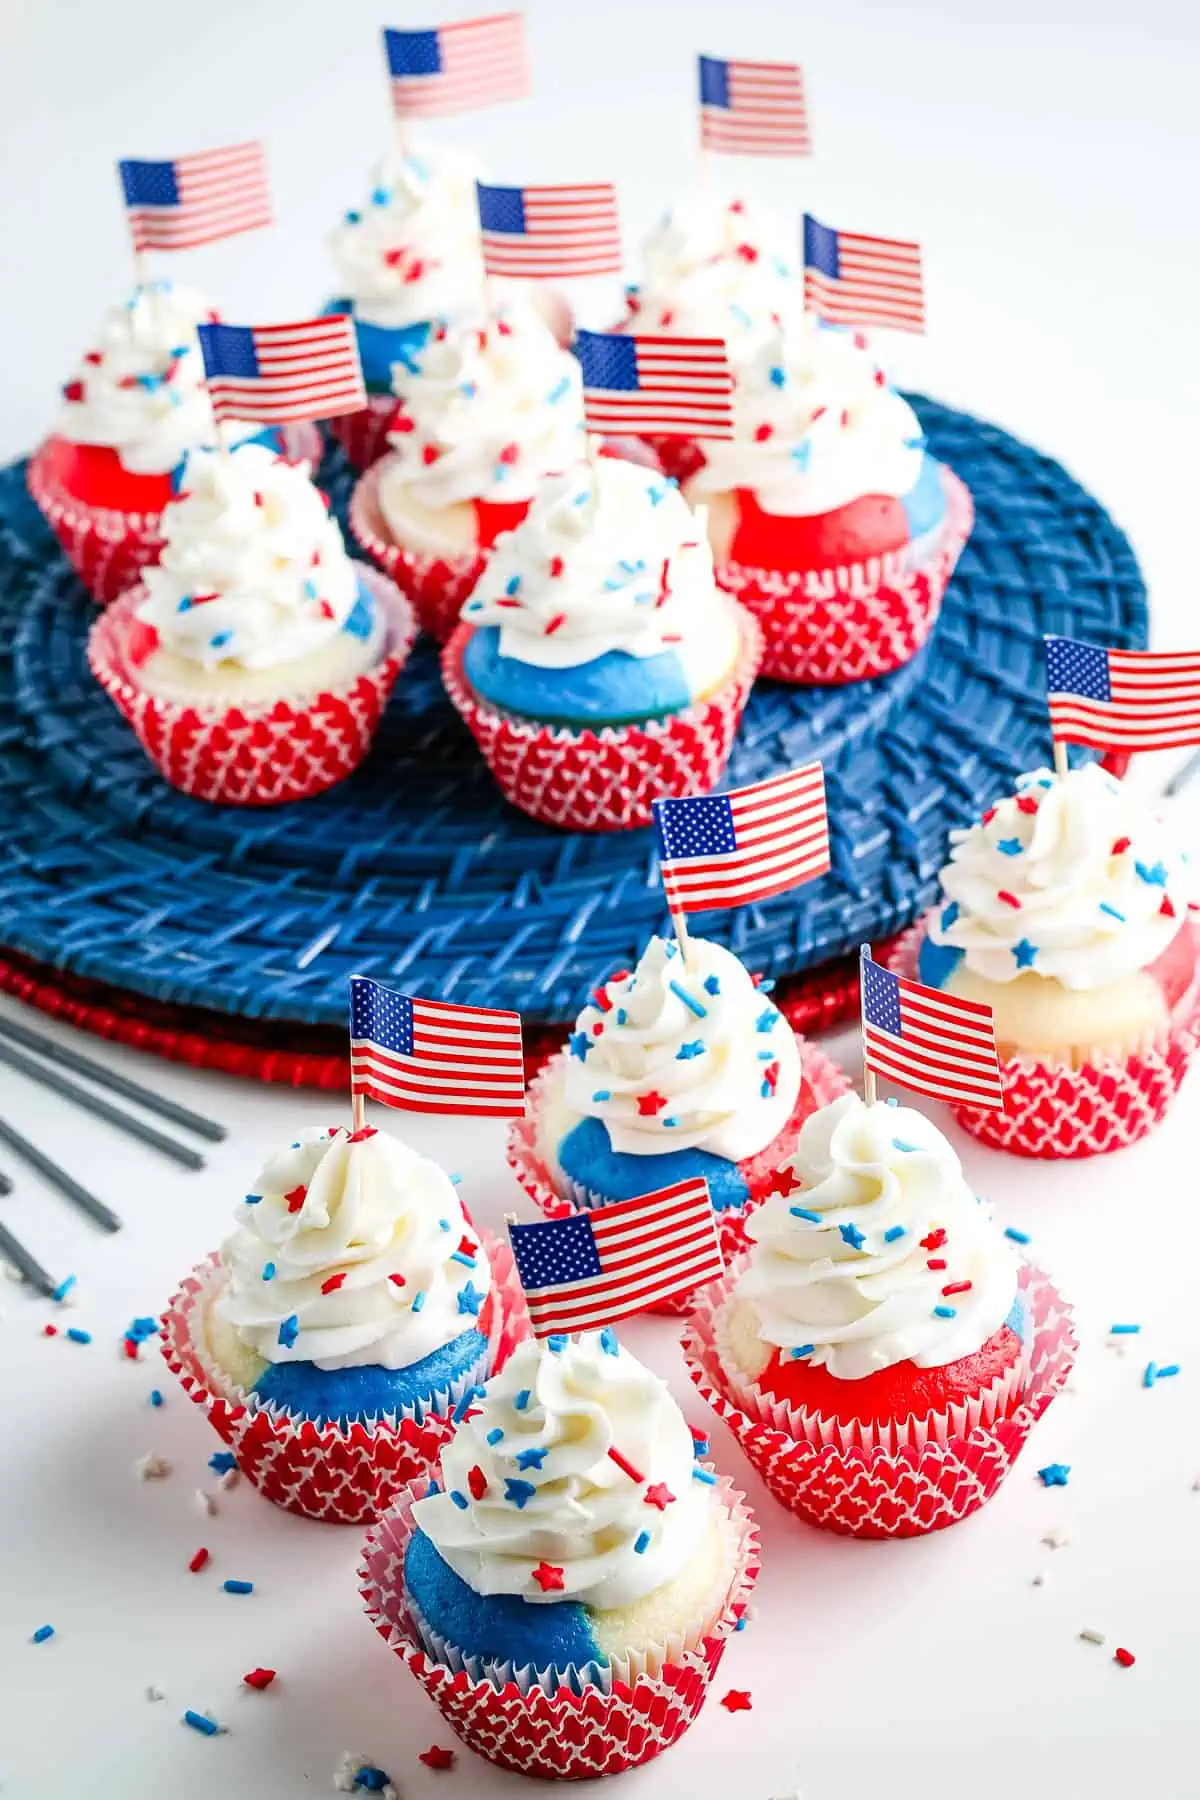 decorated red white and blue patriotic cupcakes with buttercream frosting, patriotic sprinkles, and flag toppers